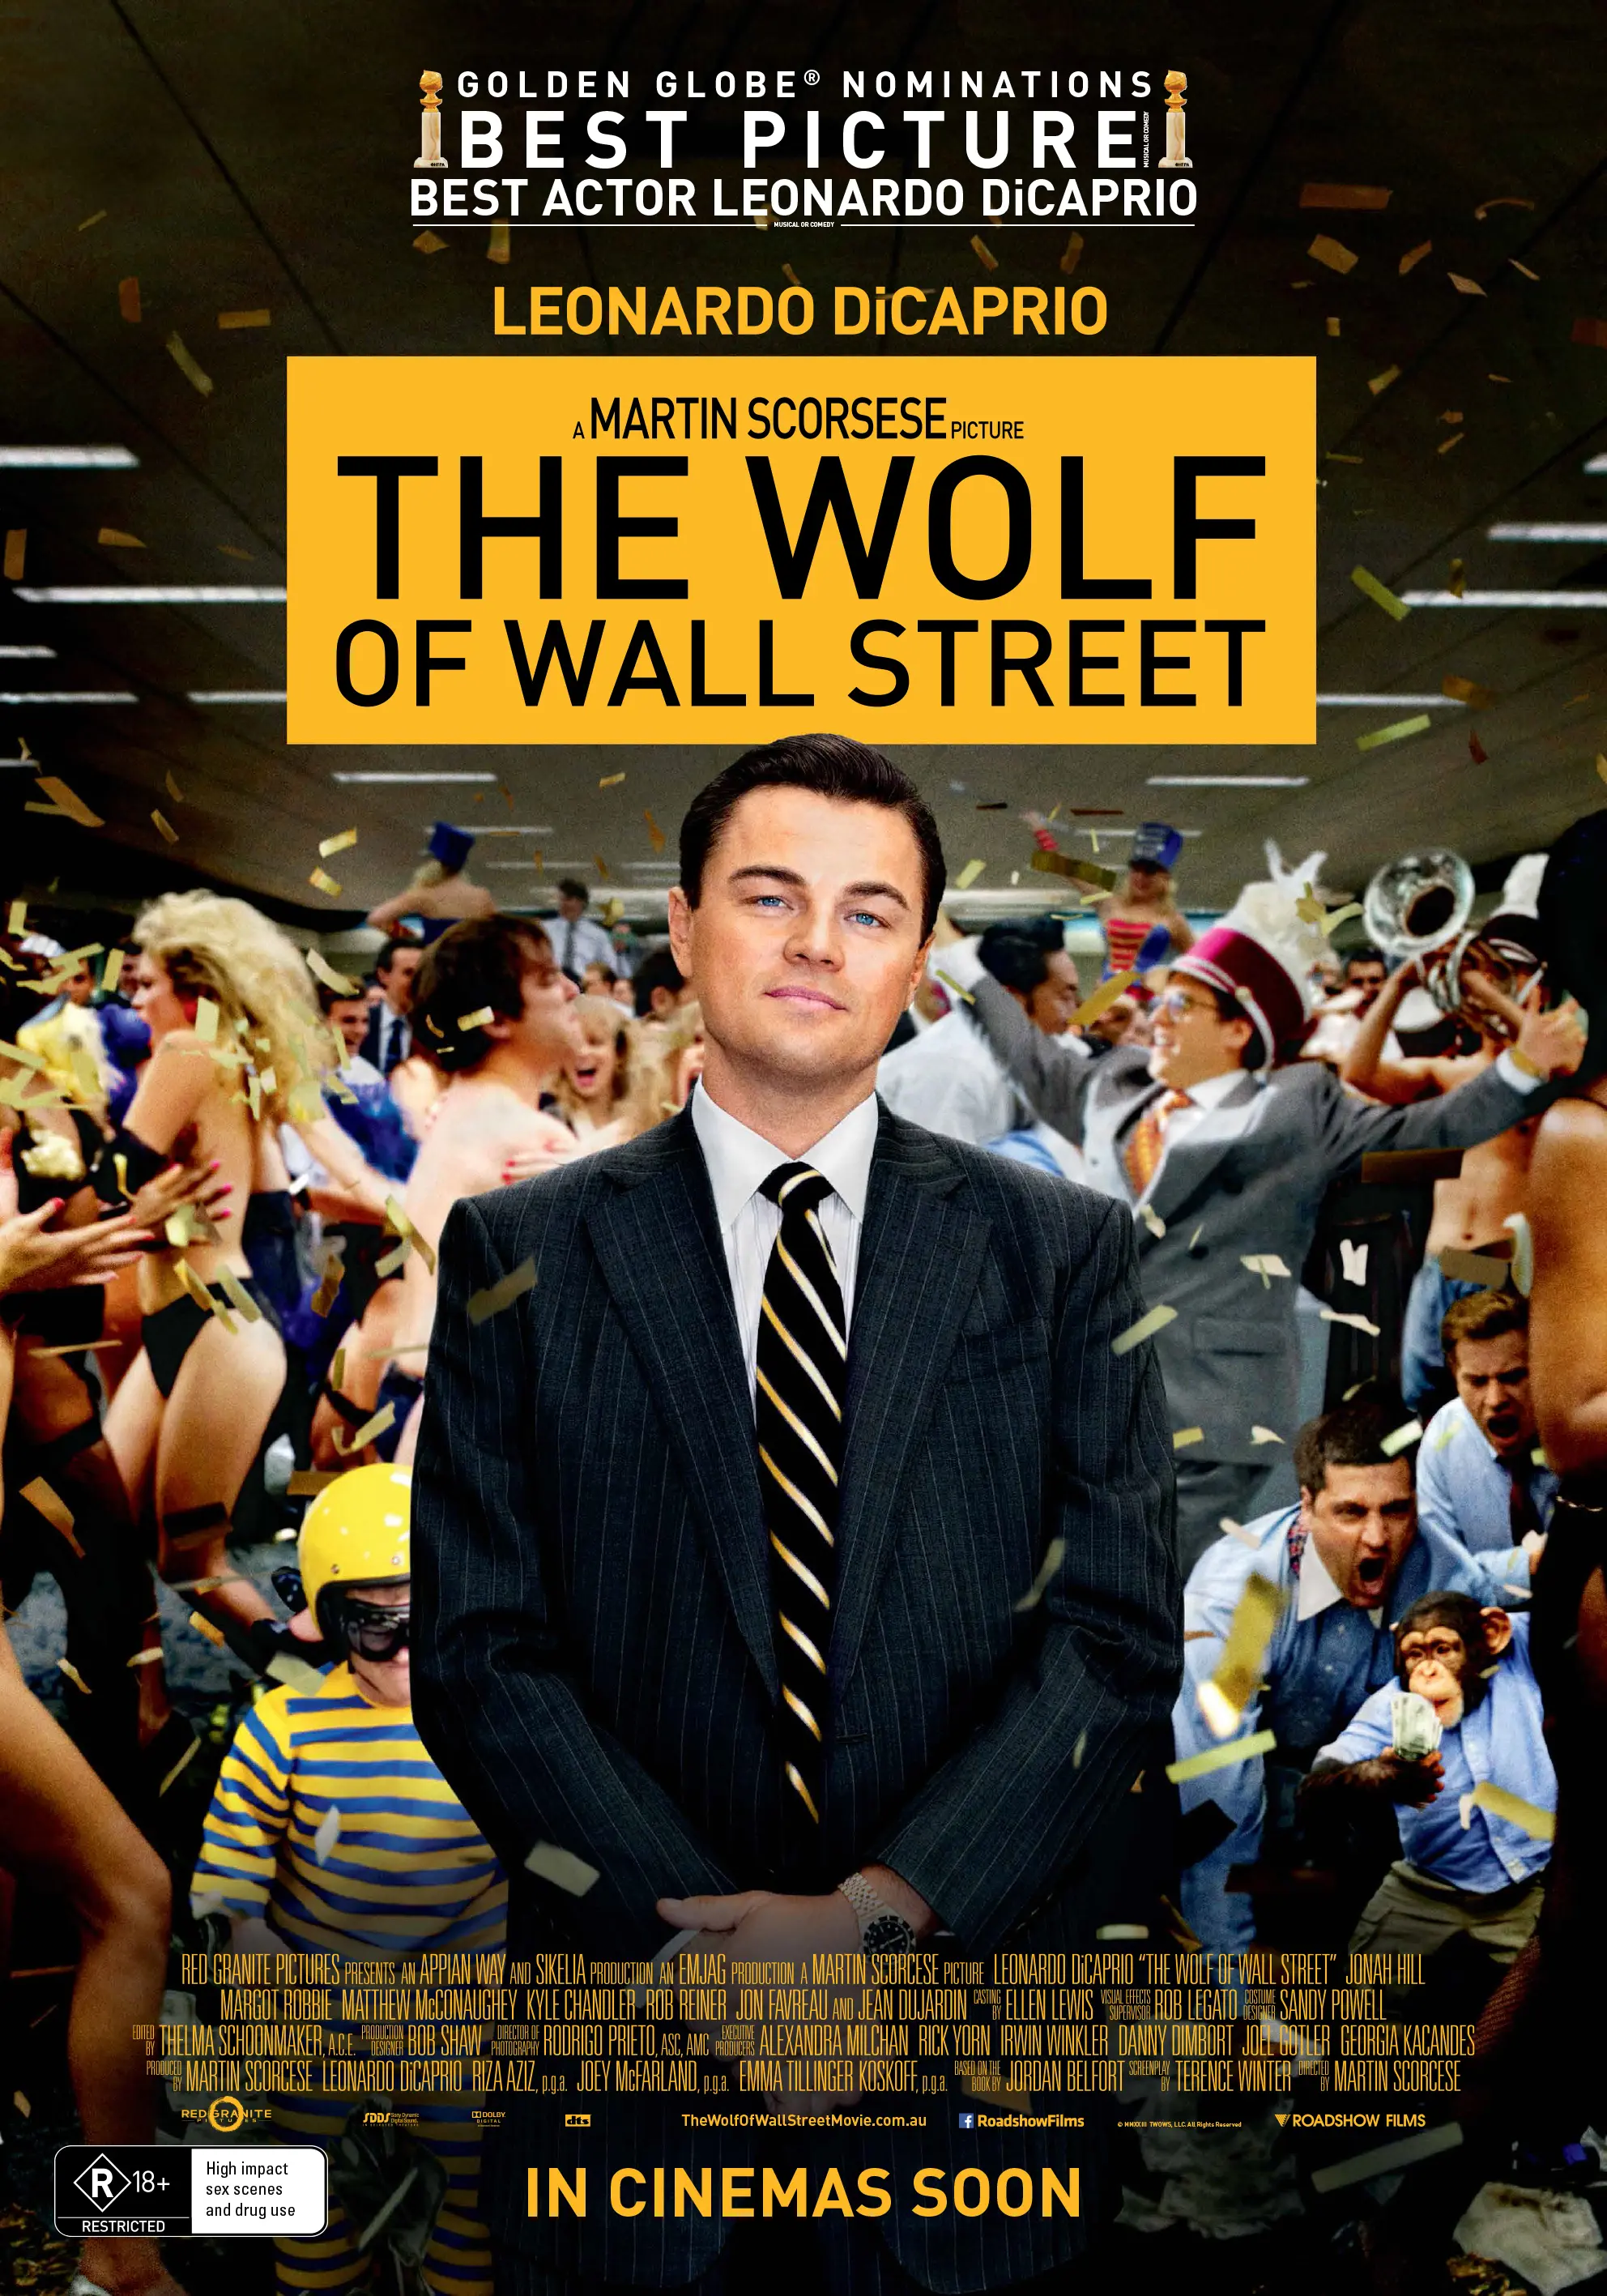 The Wolf of Wall Street. Foto: via thedailytouch.com